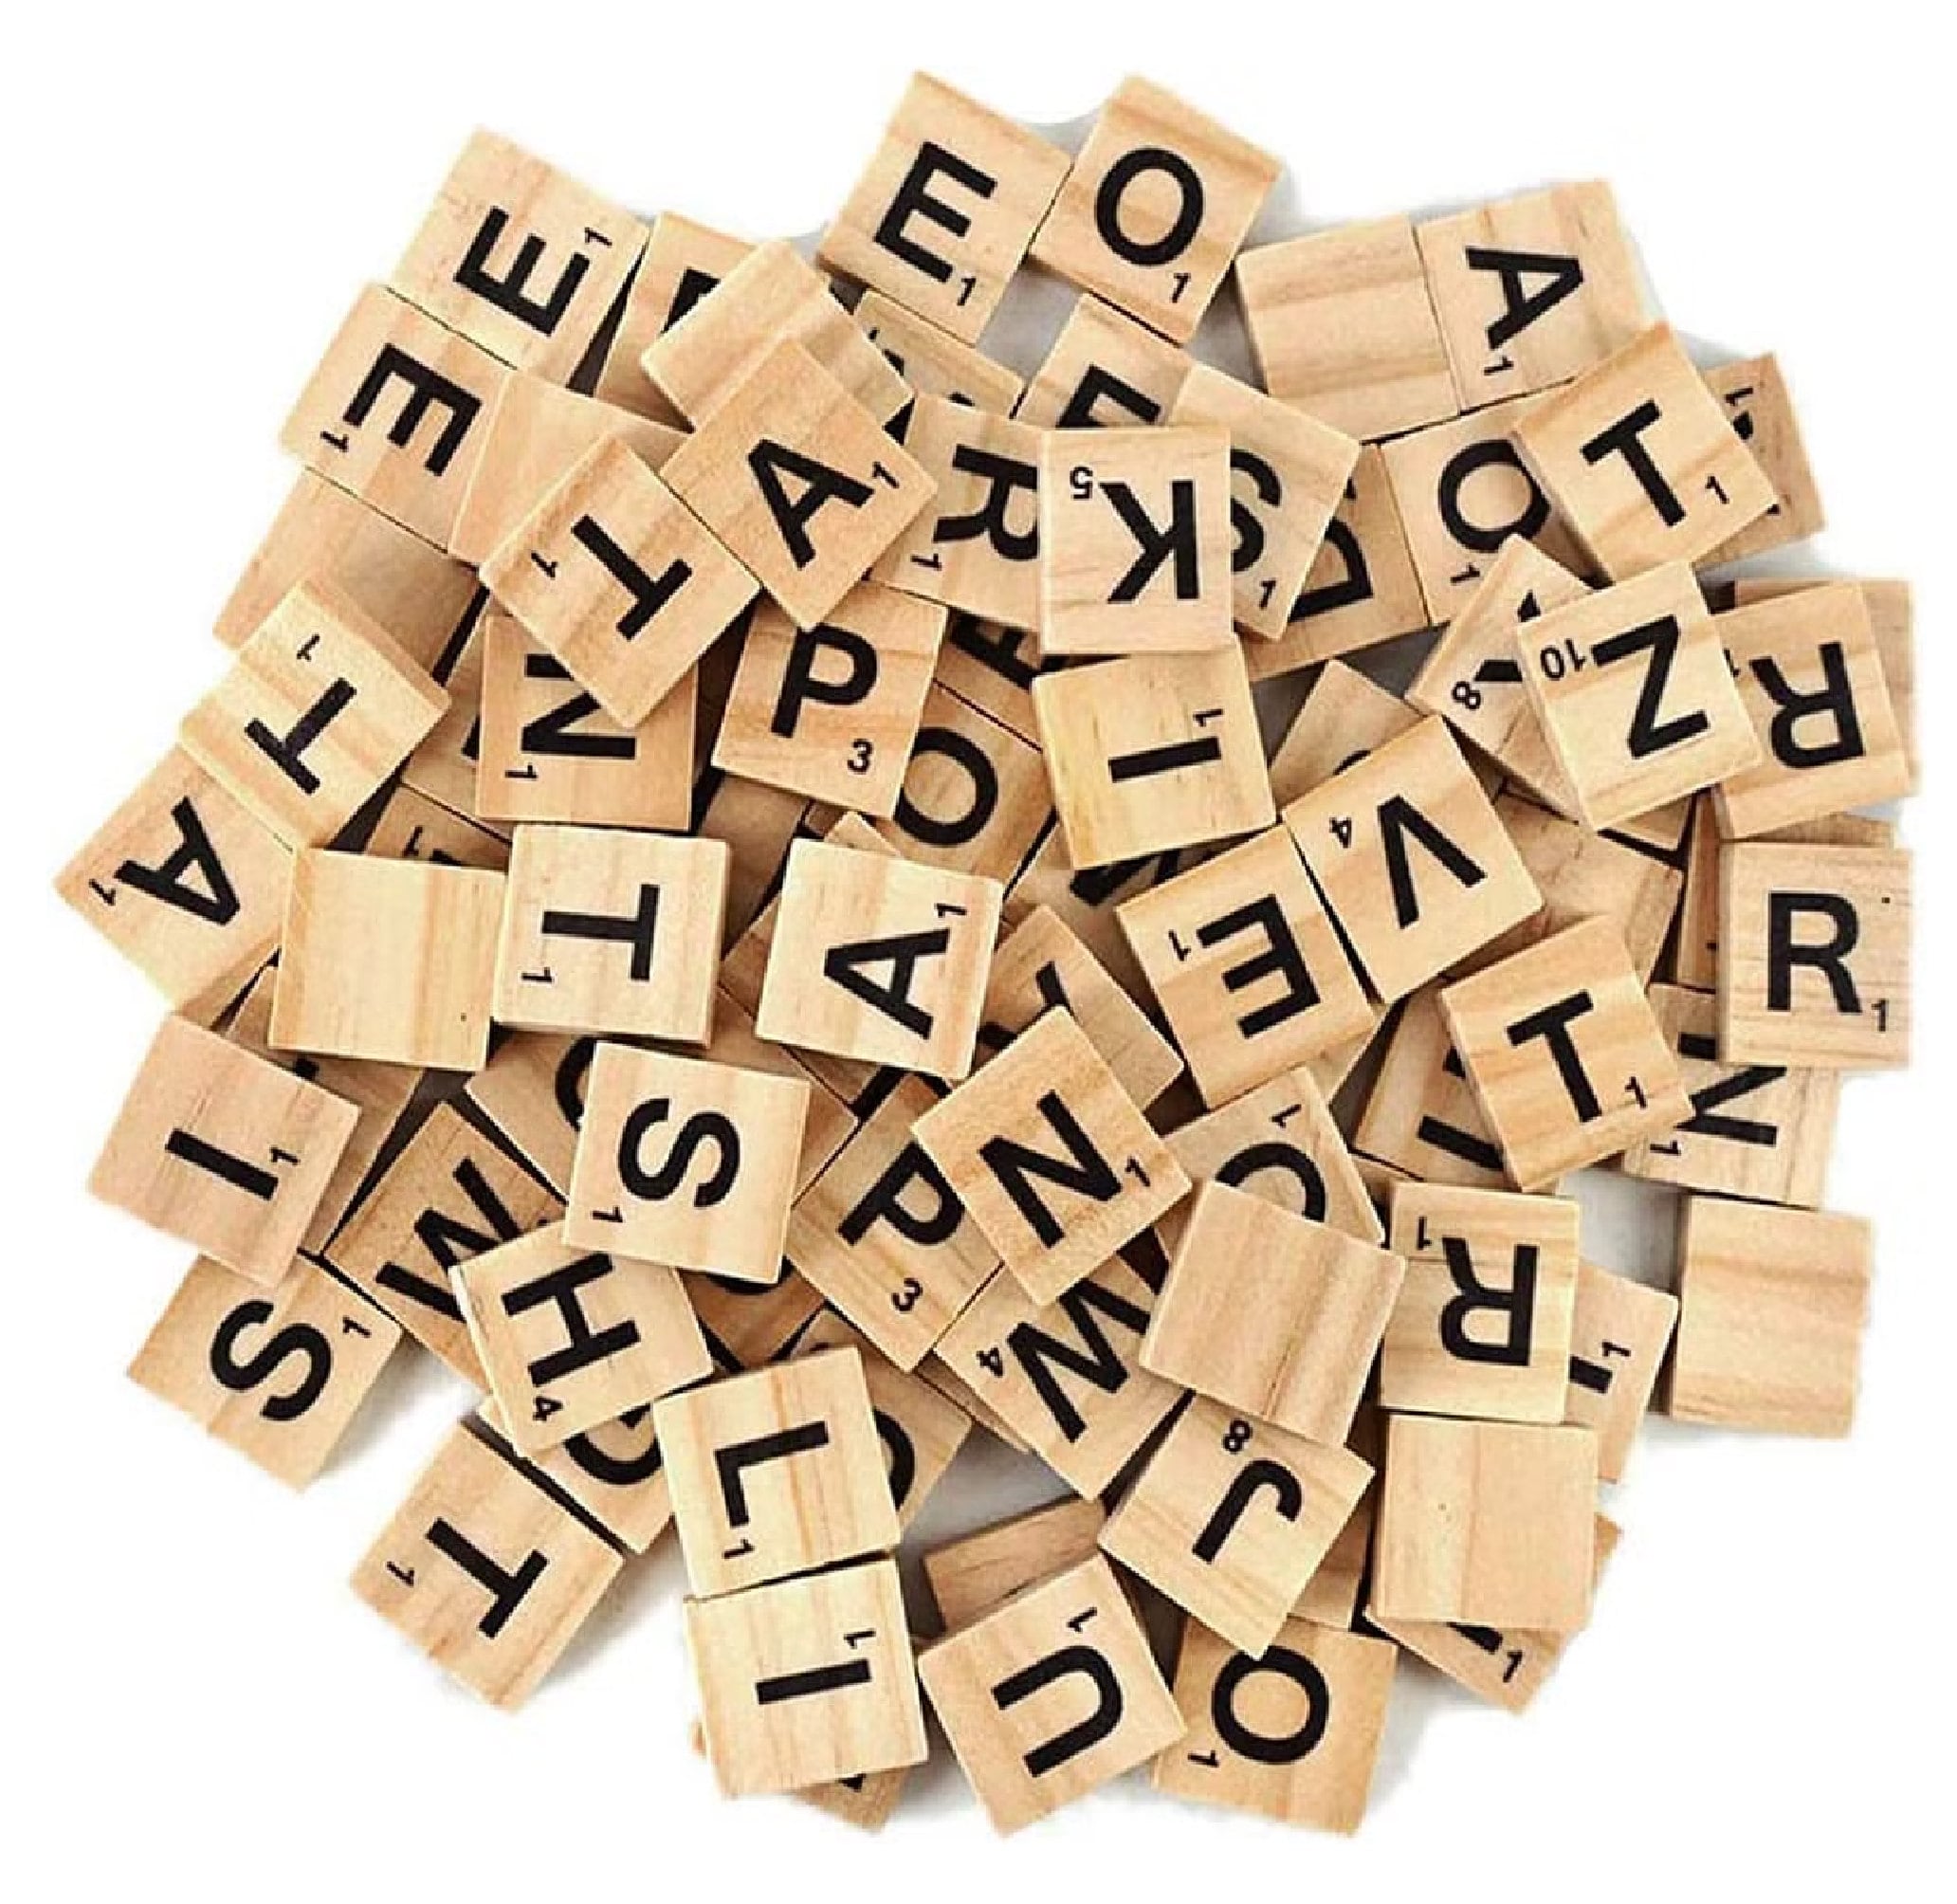 1000 Pcs Scrabble Letters for Crafts, Wood Scrabble tiles, DIY Wood Gift Decoration, Making Alphabet Coasters and Scrabble Crossword Game